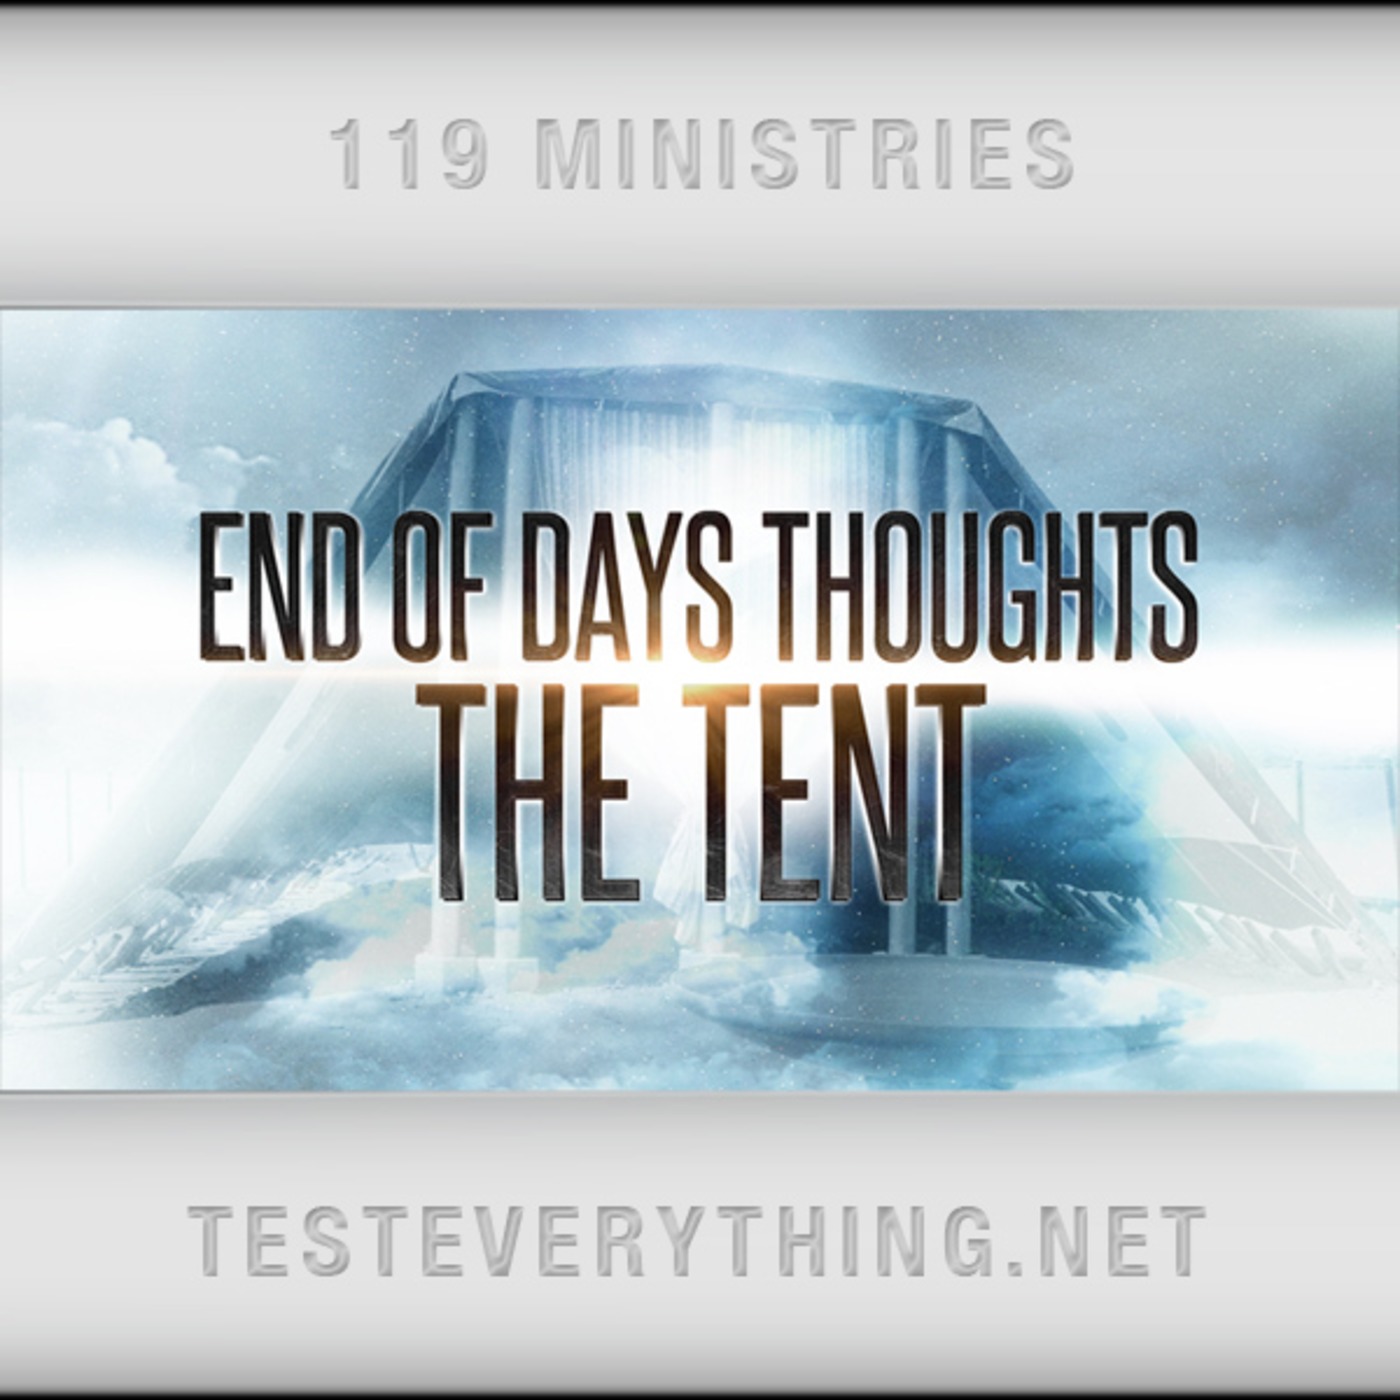 End of Days Thought - The Tent